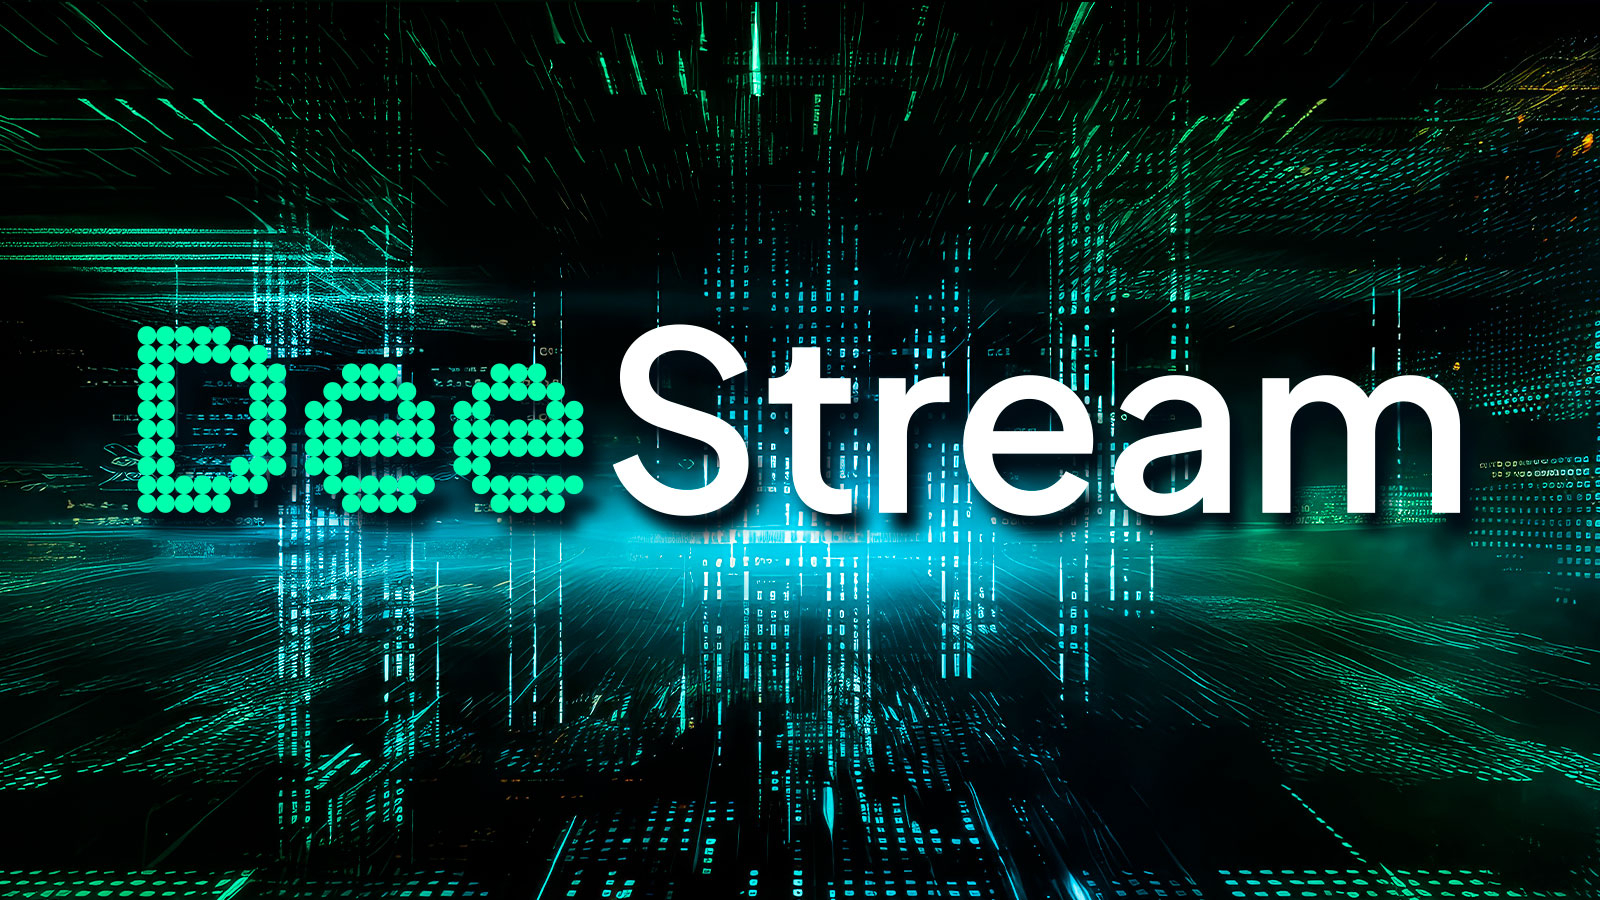 DeeStream (DST) Cryptocurrency Pre-Sale Round Welcomed by Traders in Q2 as USDC, XRP Set Fresh Trading Volume Highs